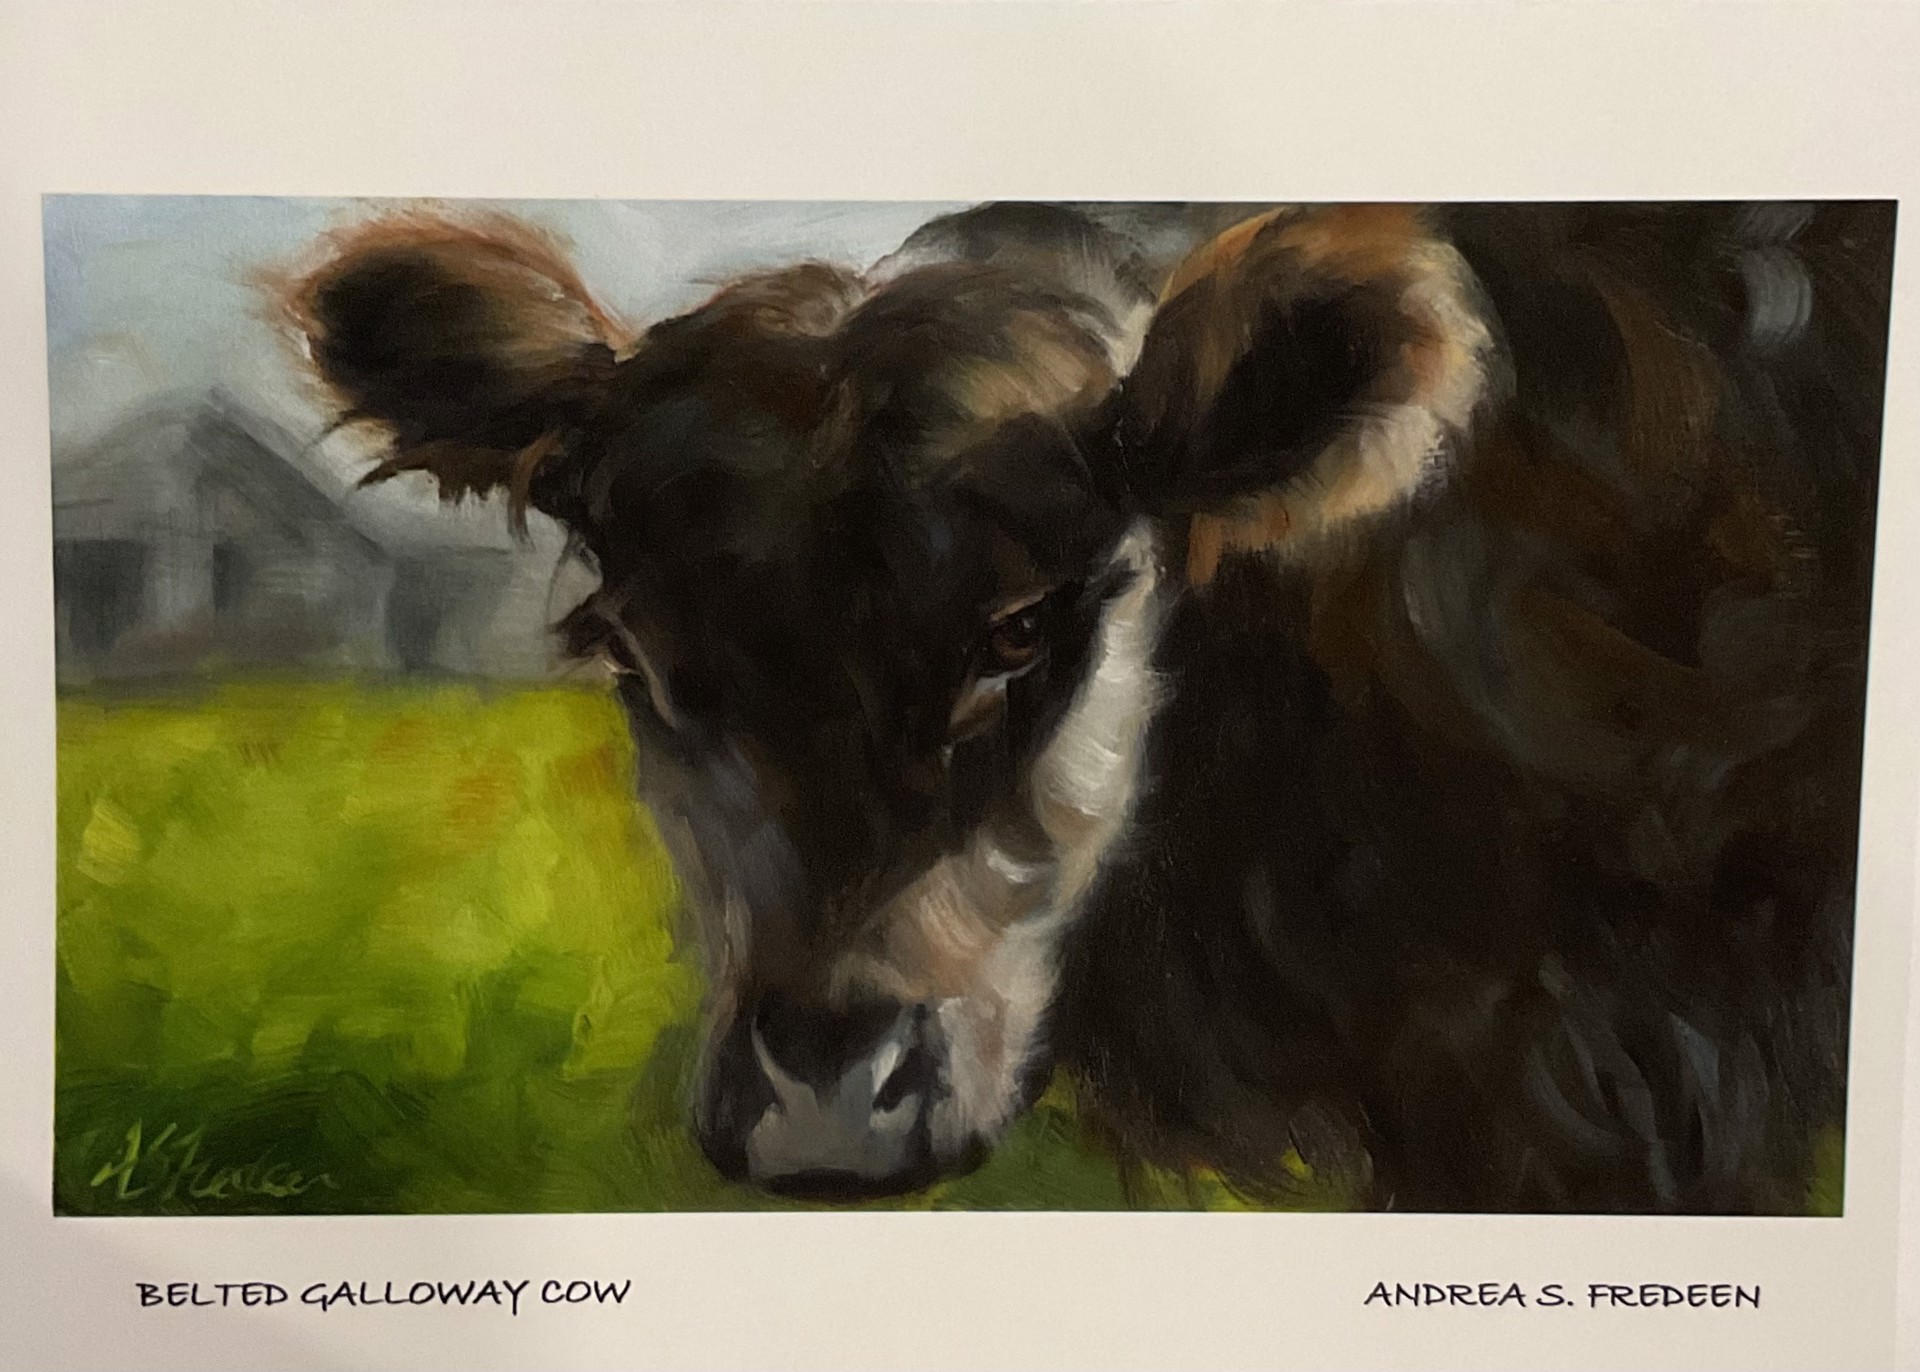 Belted Galloway Beauty - Large Card by Andrea S. Fredeen